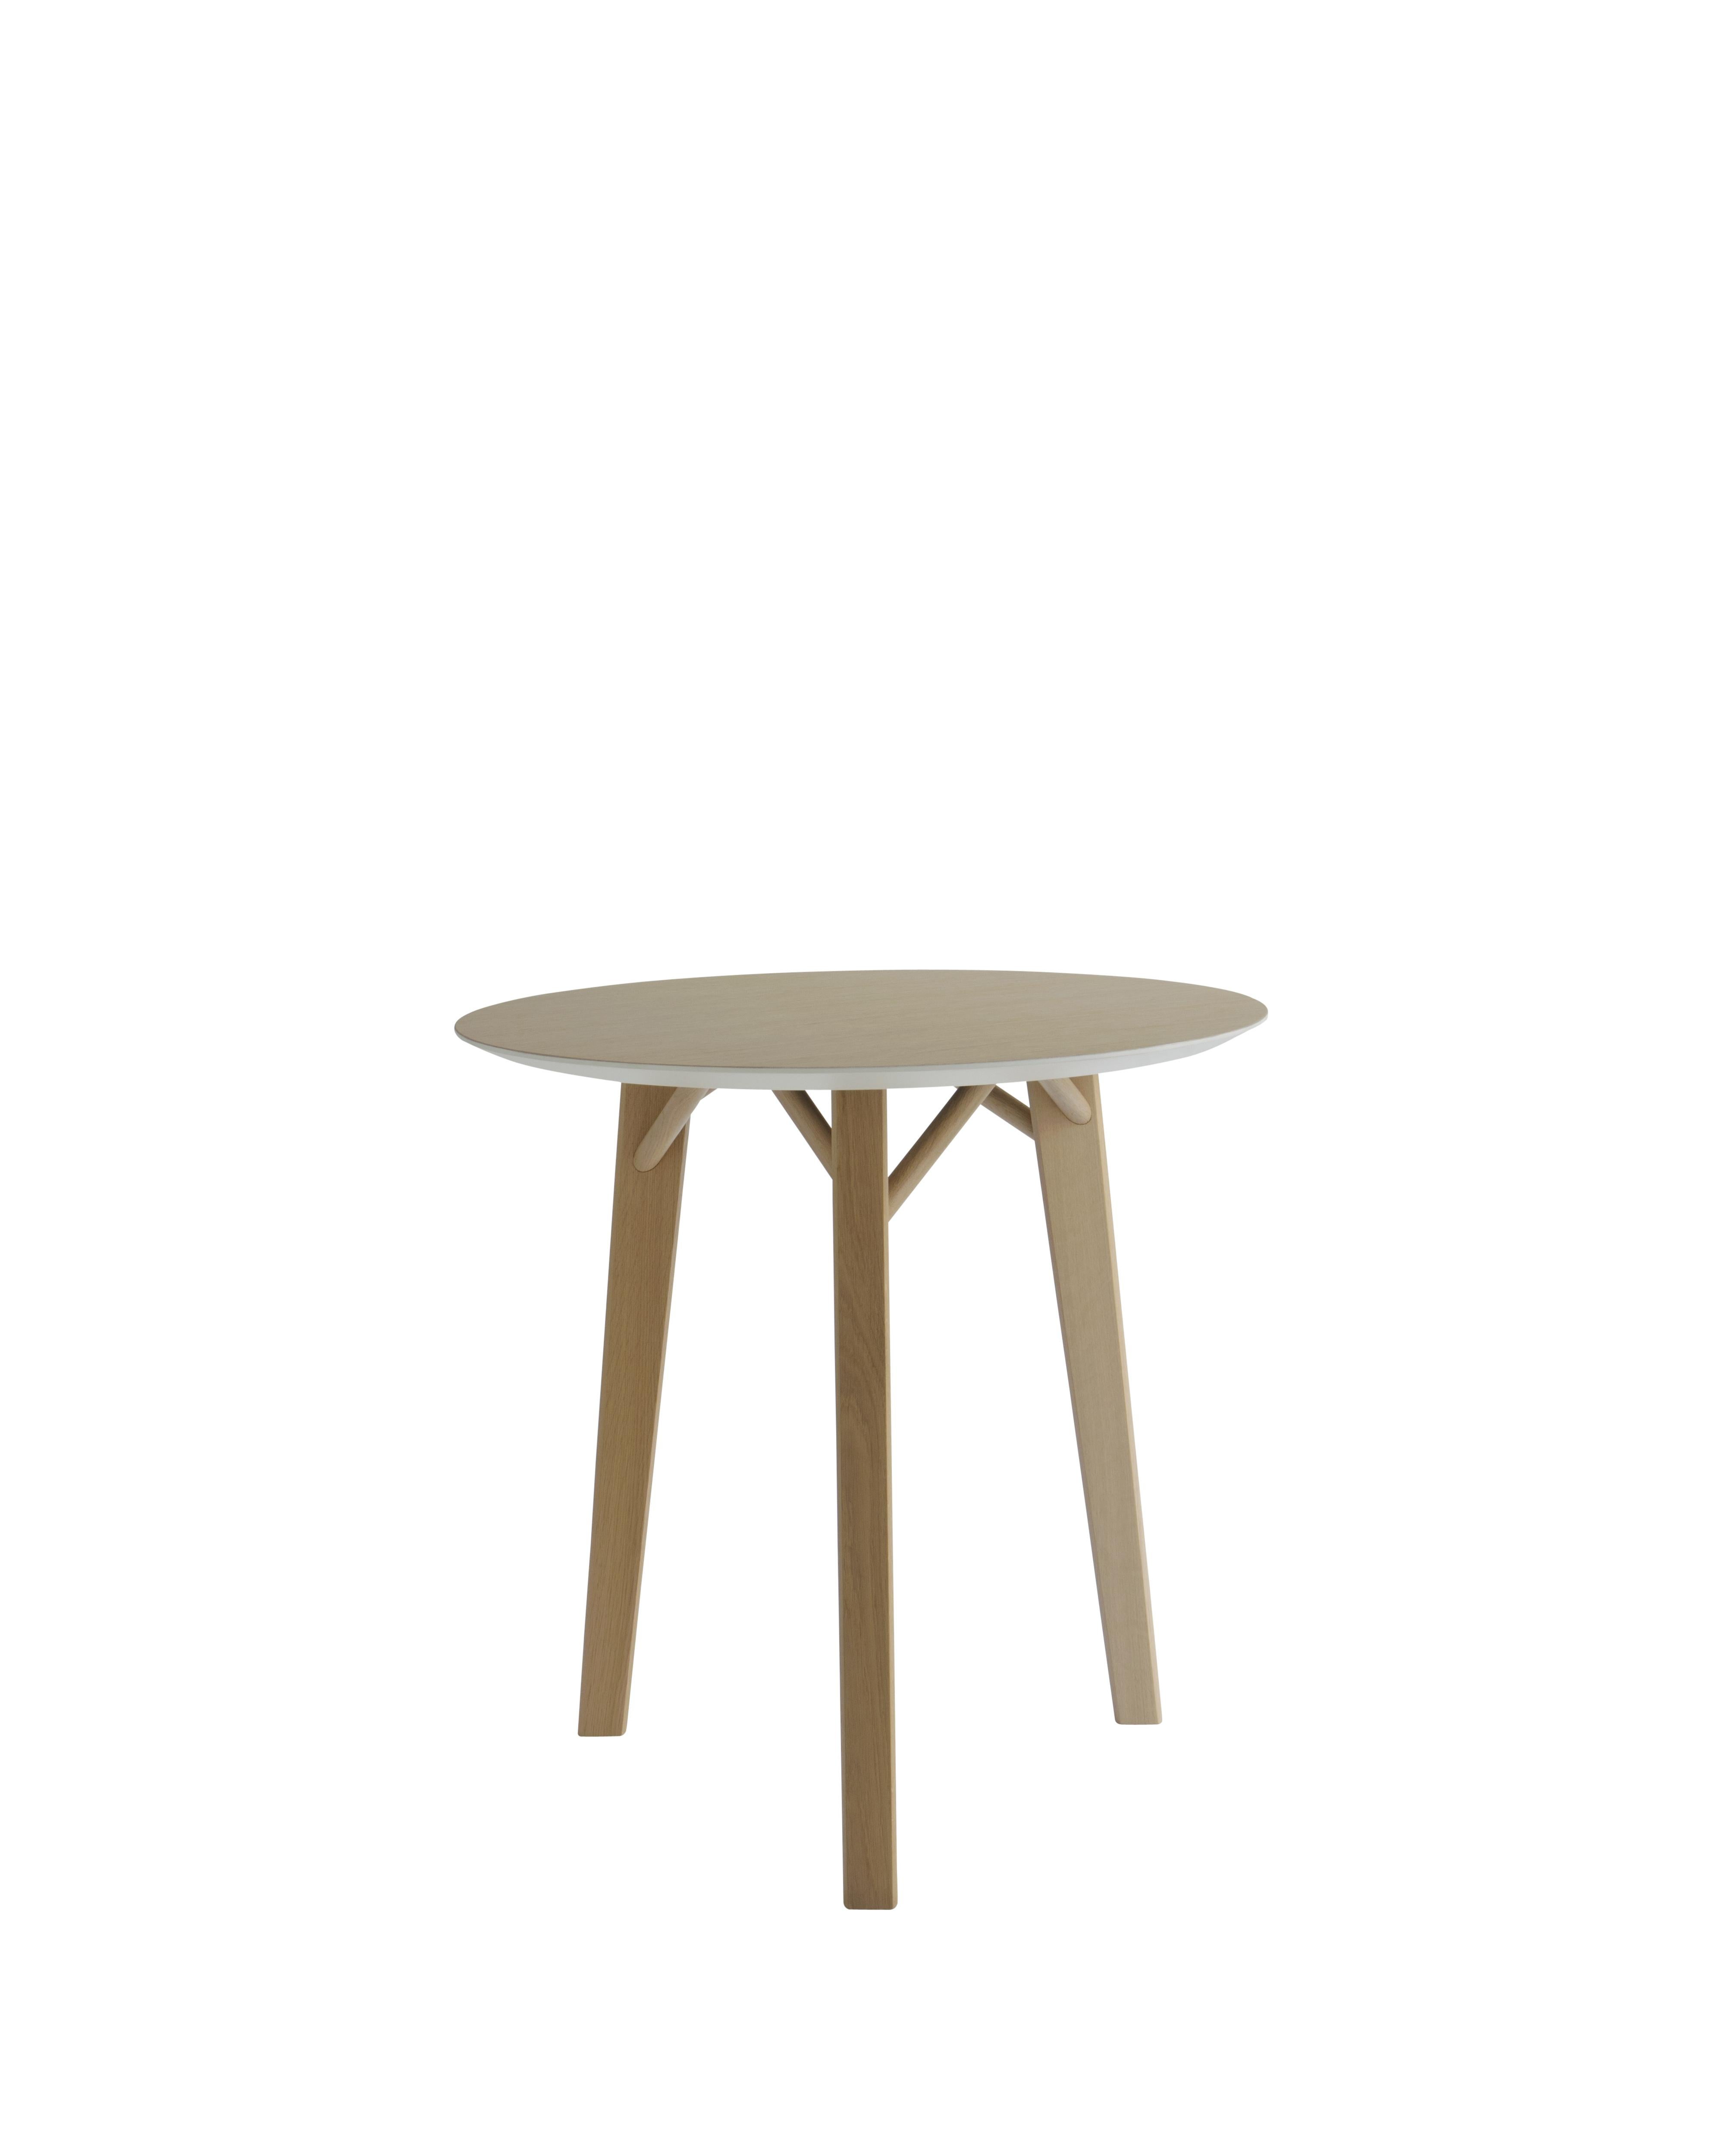 Small, tria kiklos table by Colé Italia with Lorenz + Kaz, 2012
Dimensions: H.75; ø 75/140
Materials: Veneered, lacquered, or ceramic top with rounded corners, accordingly lacquered on the back. 3 solid oak Legs. (Custom size top available upon